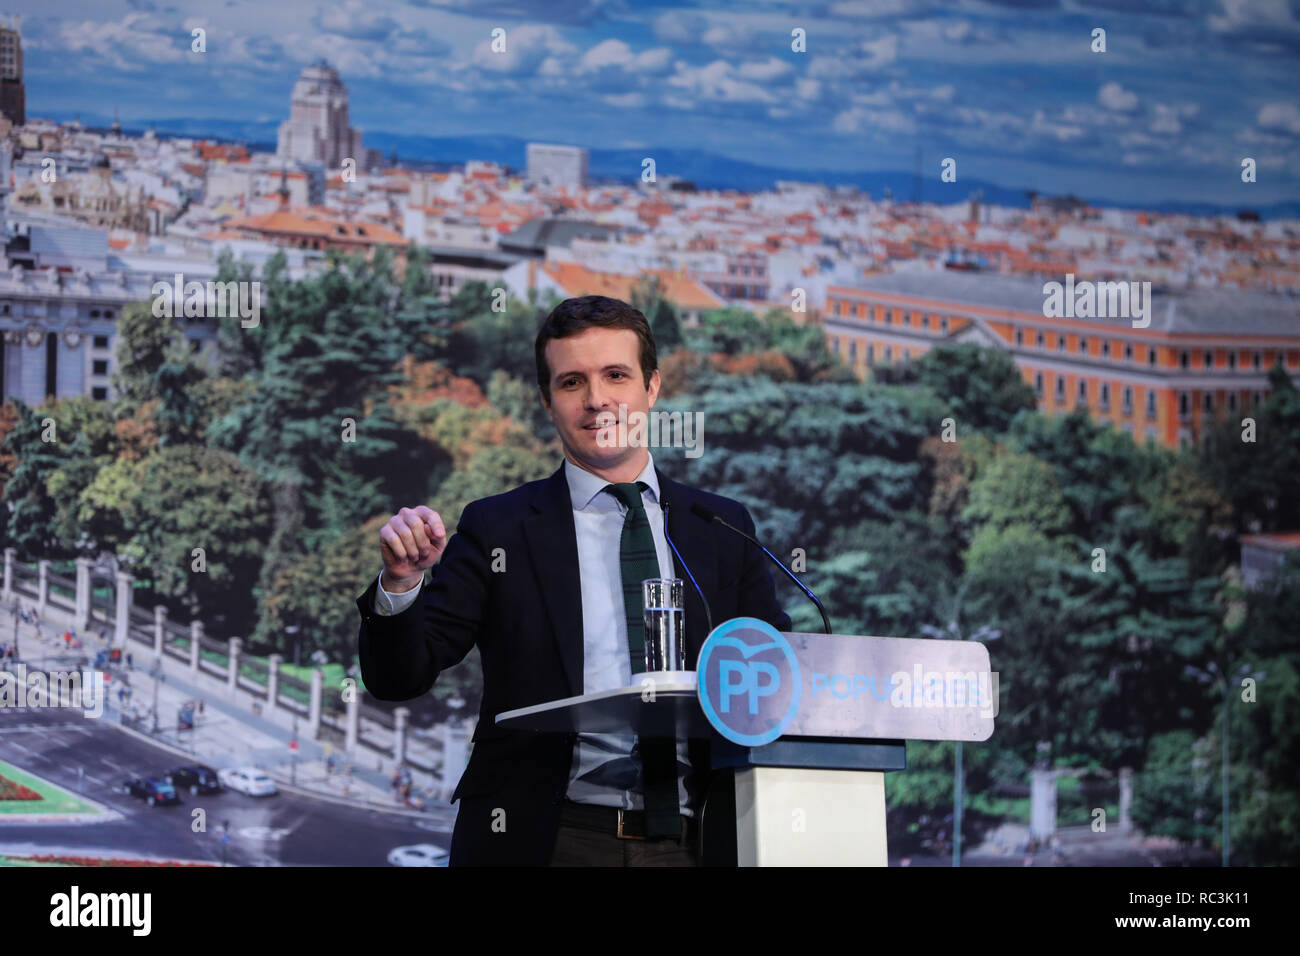 Madrid, Spain. 13th Janaury 2019. PABLO CASADO, President of the National Popular Party speaking in the act. The PP of Madrid has celebrated this Sunday a multitudinous act in the theater Goya the presentation of José Luis Martínez-Almeida and Isabel Díaz Ayuso that will be the candidates of the PP to the City council and the Community of Madrid, respectively, for the next regional and local elections of May on Jan 13, 2019 in Madrid, Spain Credit: Jesús Hellin/Alamy Live News Stock Photo